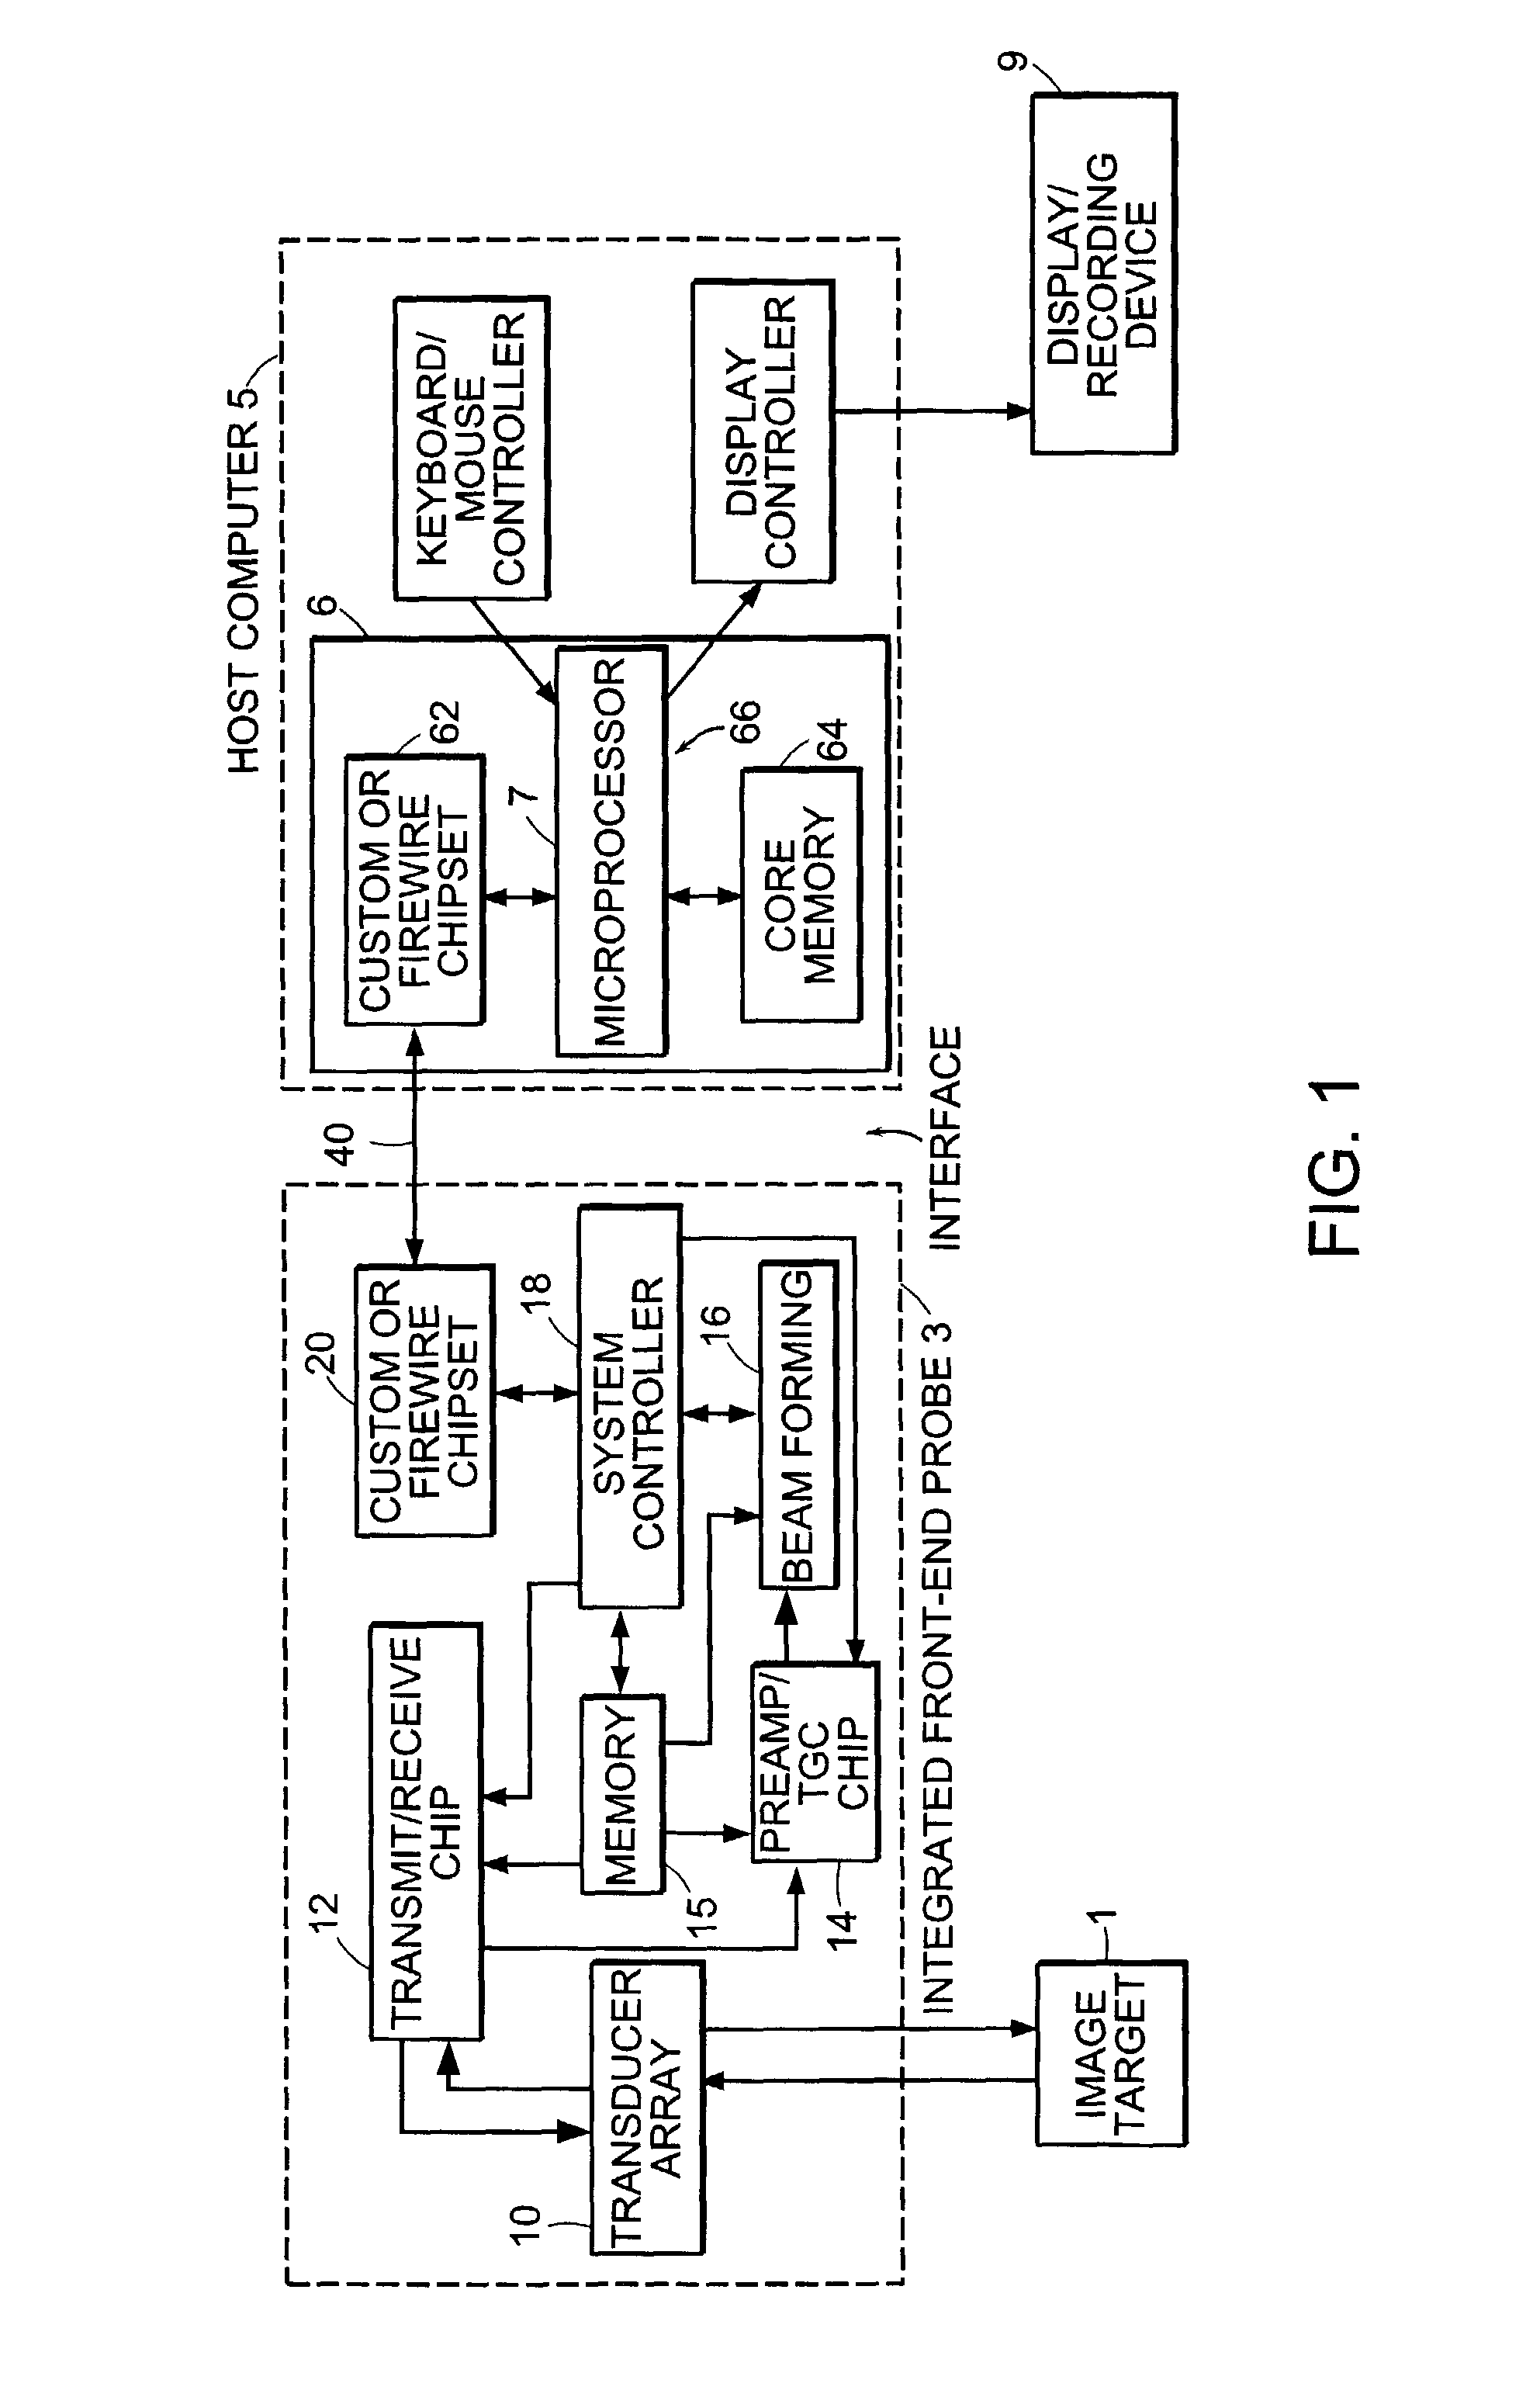 Methods for controlling an ultrasound imaging procedure and providing ultrasound images to an external non-ultrasound application via a network